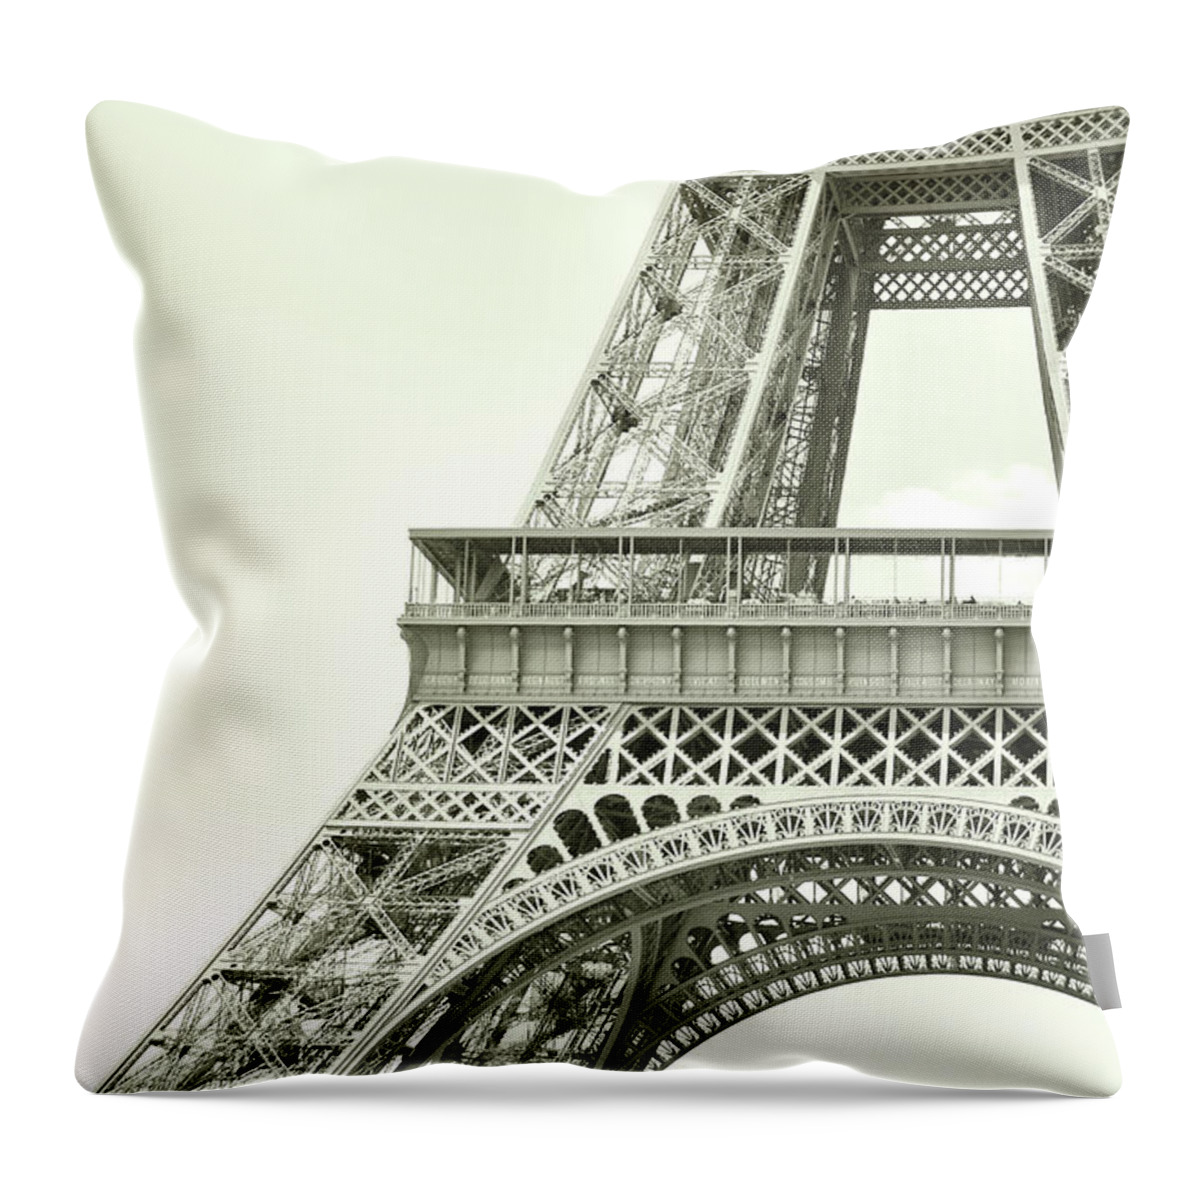 1887 Throw Pillow featuring the photograph Altitude 95 Grunge by JAMART Photography